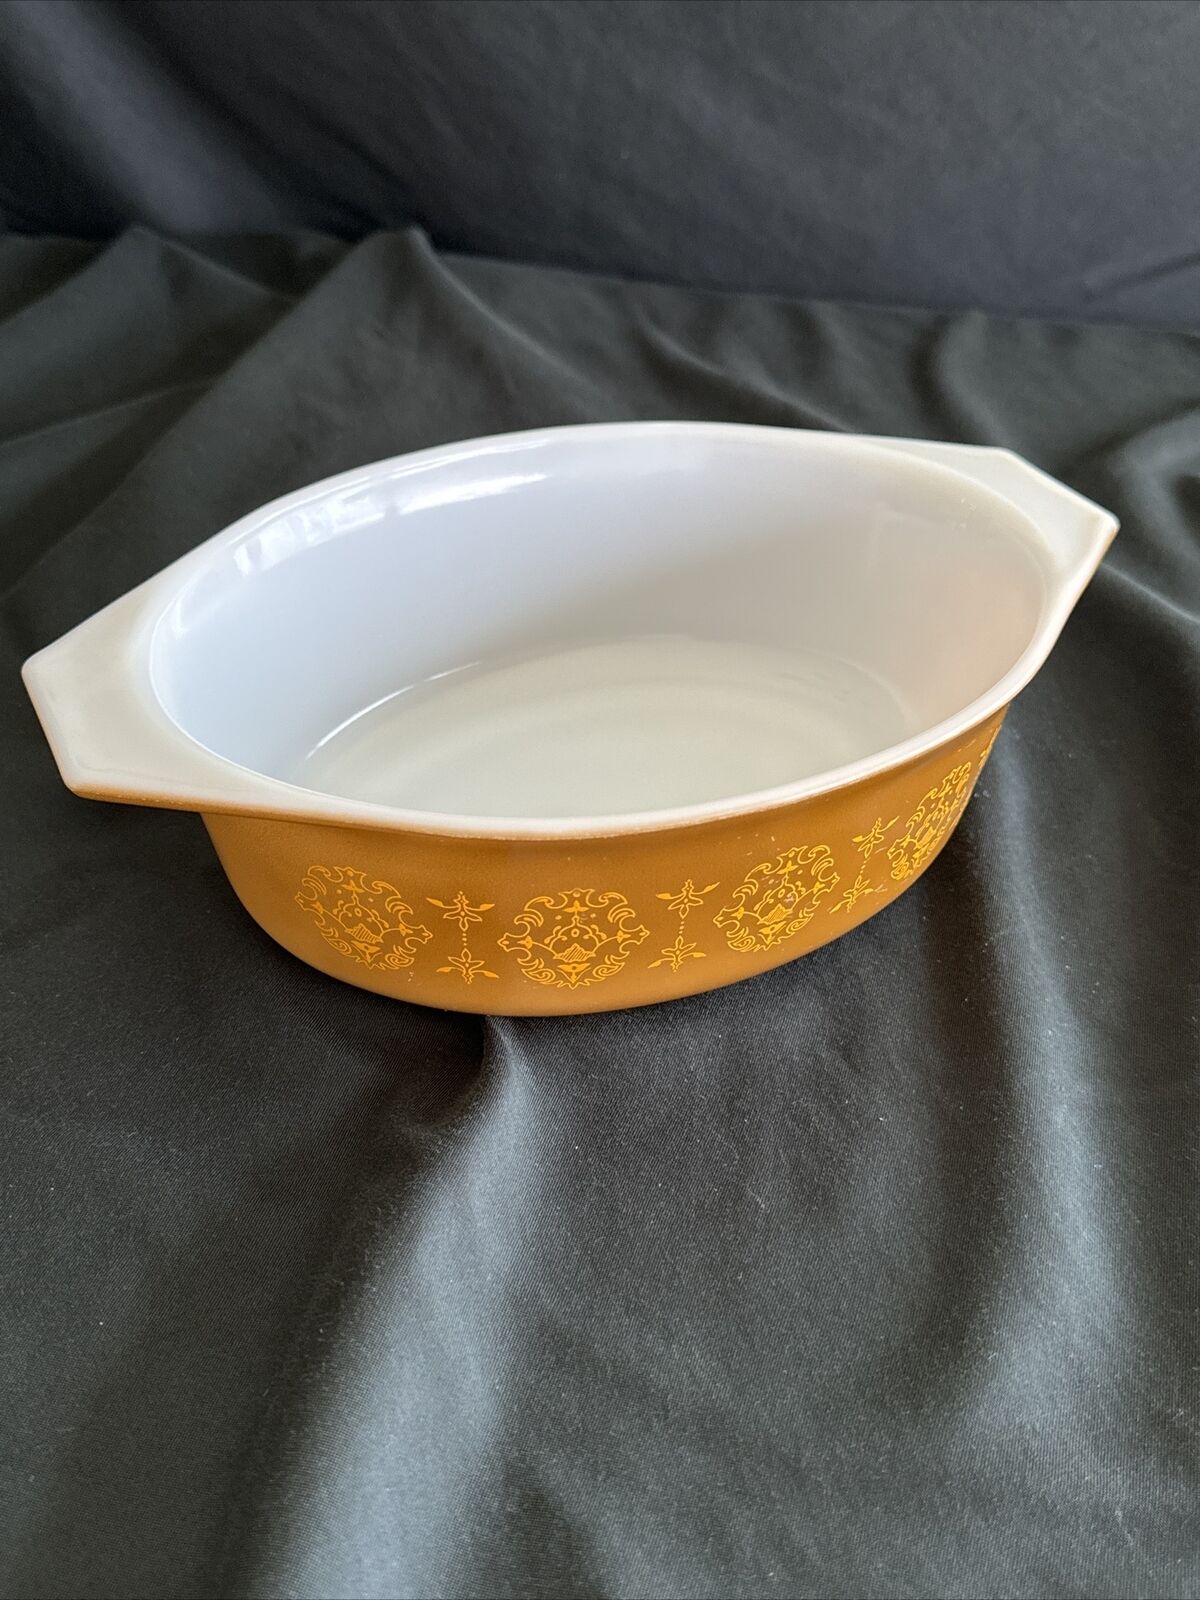 Pyrex Regency 1 1/2 Qt Oval Casserole Dish With Lid Brown/Gold